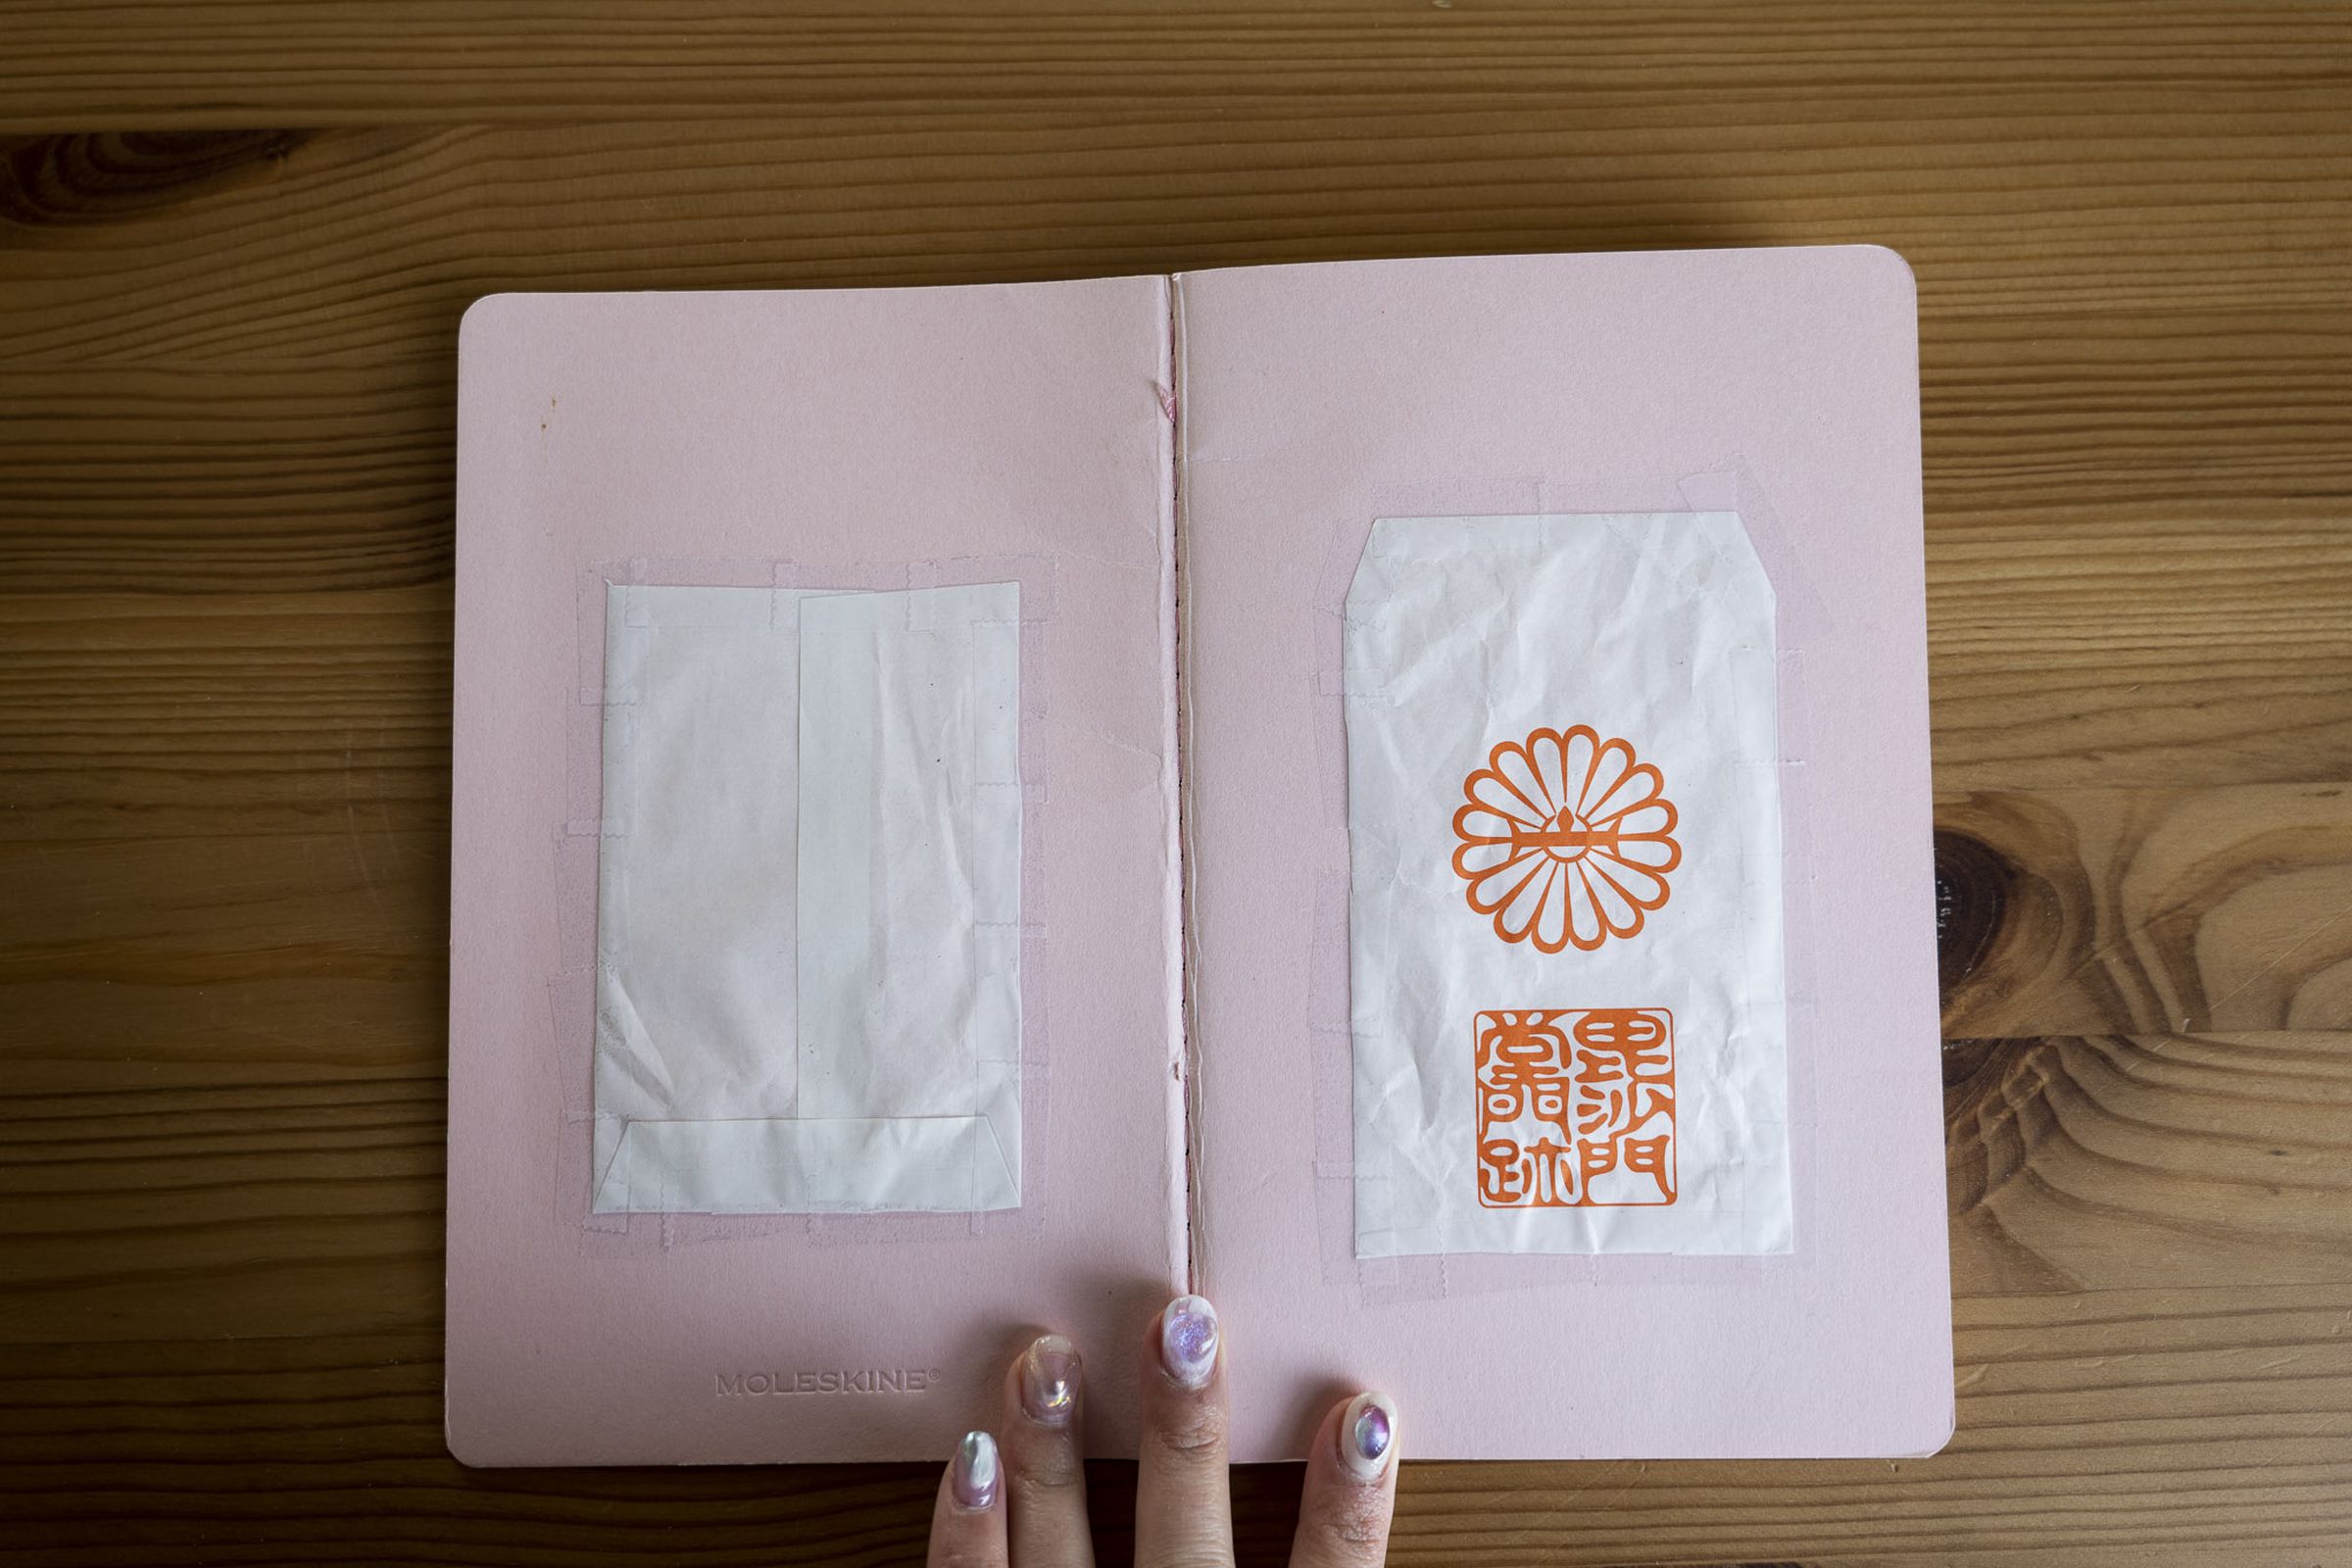 A Moleskine notebook opened with the cover facing up. A cut open paper envelope is taped onto the front and back cover of the notebook.